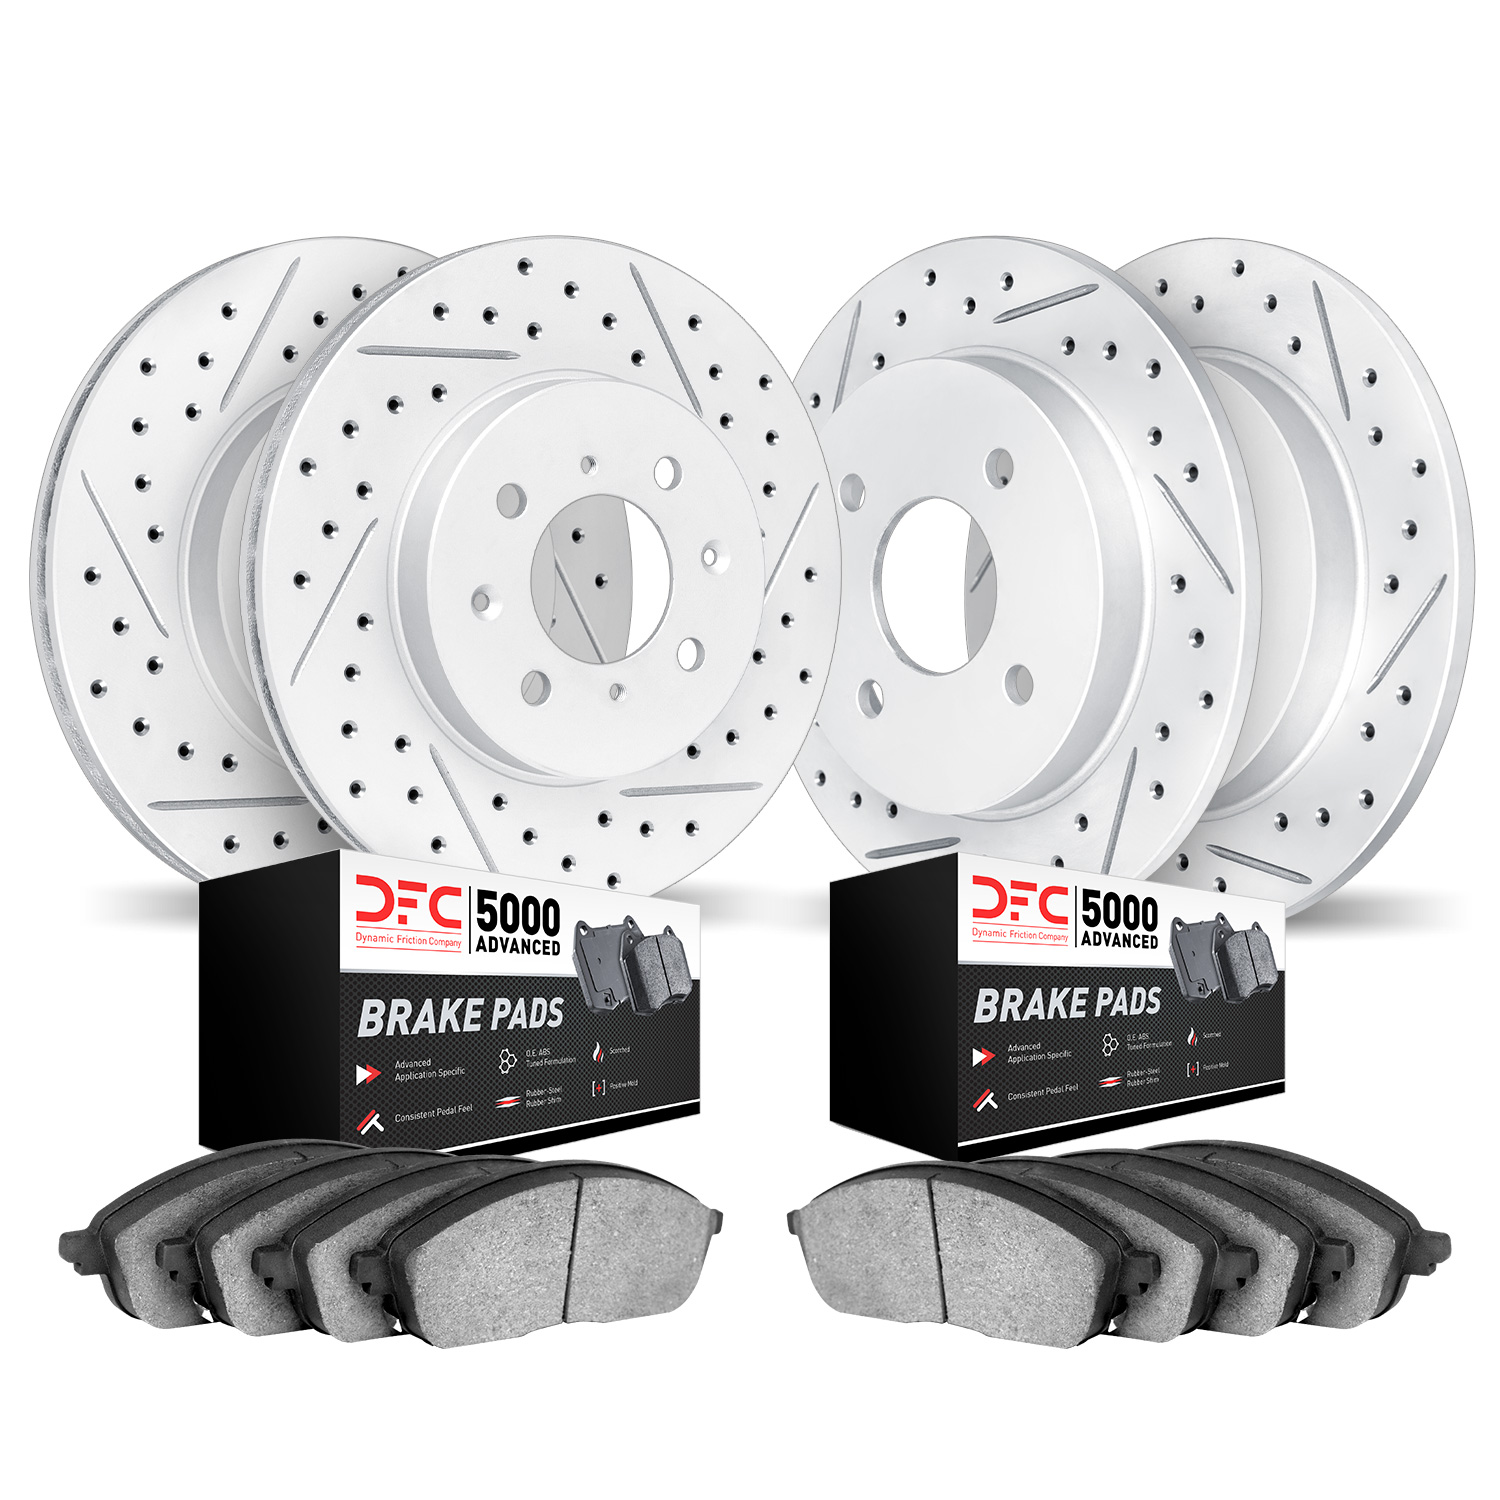 2504-03055 Geoperformance Drilled/Slotted Rotors w/5000 Advanced Brake Pads Kit, 2012-2017 Multiple Makes/Models, Position: Fron